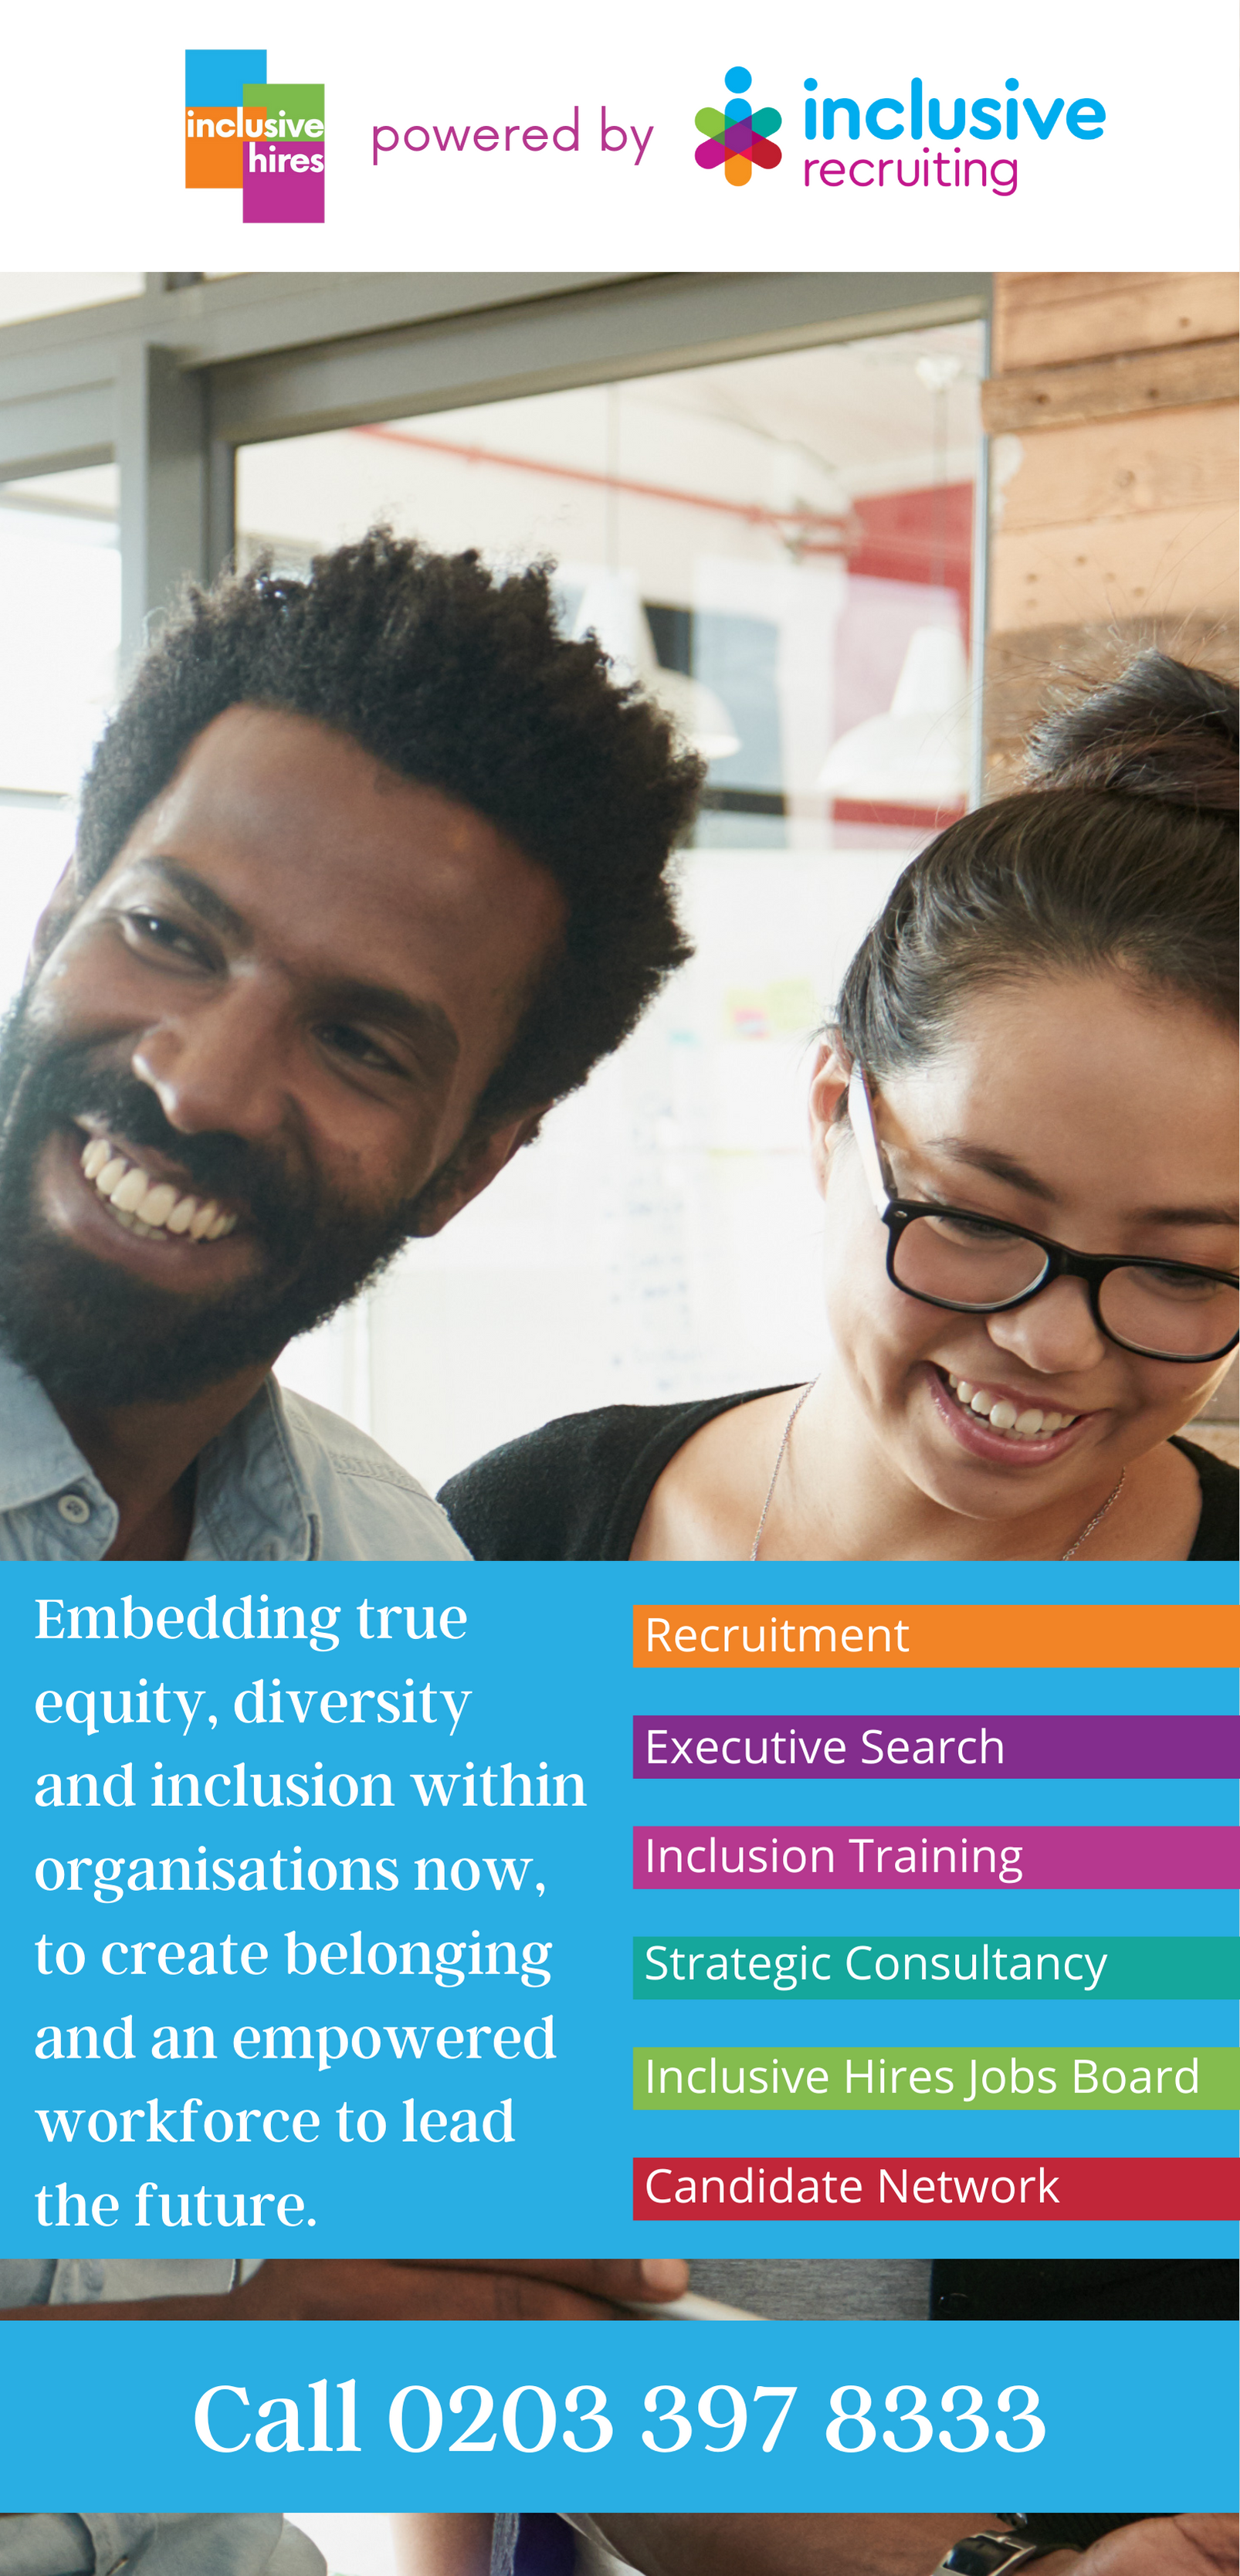 Inclusive Hires powered by Inclusive Recruiting Embedding true equity diversity and inclusion within organisations now to create belonging and an empowered workforce to lead the future. Recruitment Executive Search Inclusion Training Strategic Consultancy Inclusive Hires Jobs Board Candidate Network Call 0203 397 8333